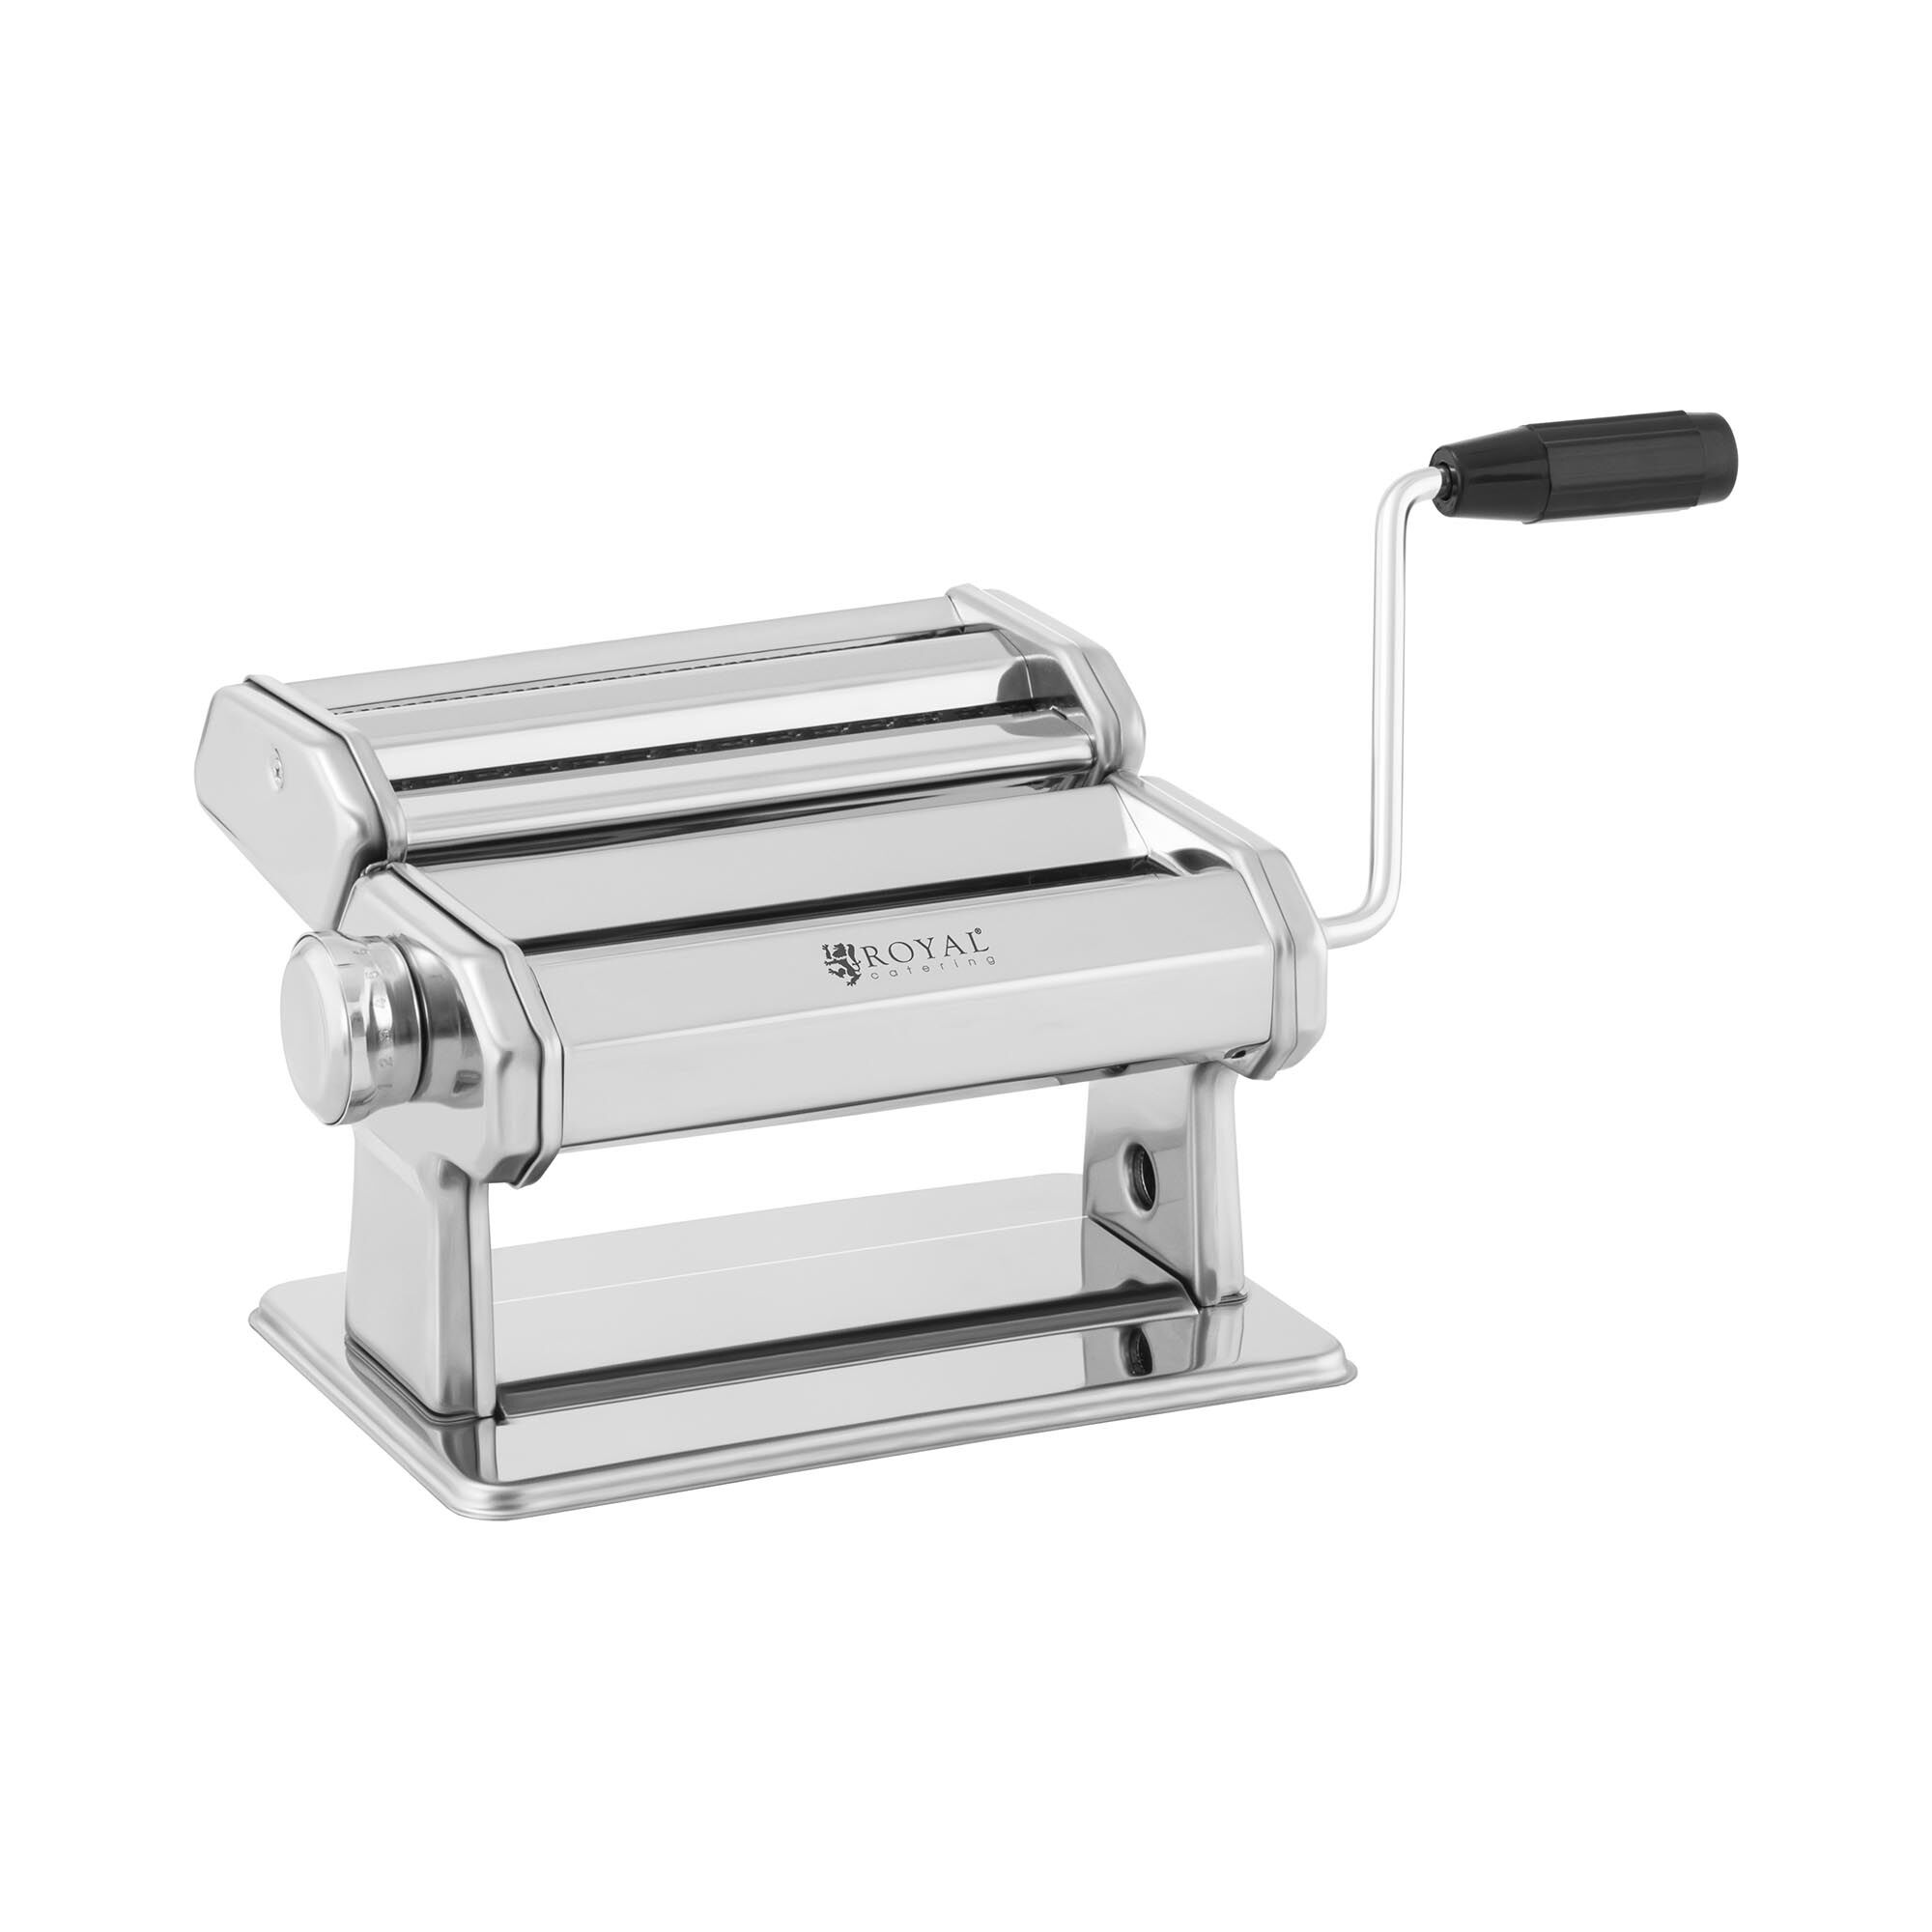 Royal Catering Pasta Machine - 17 cm - 0.5 to 3 mm - manual - removable cutting attachment